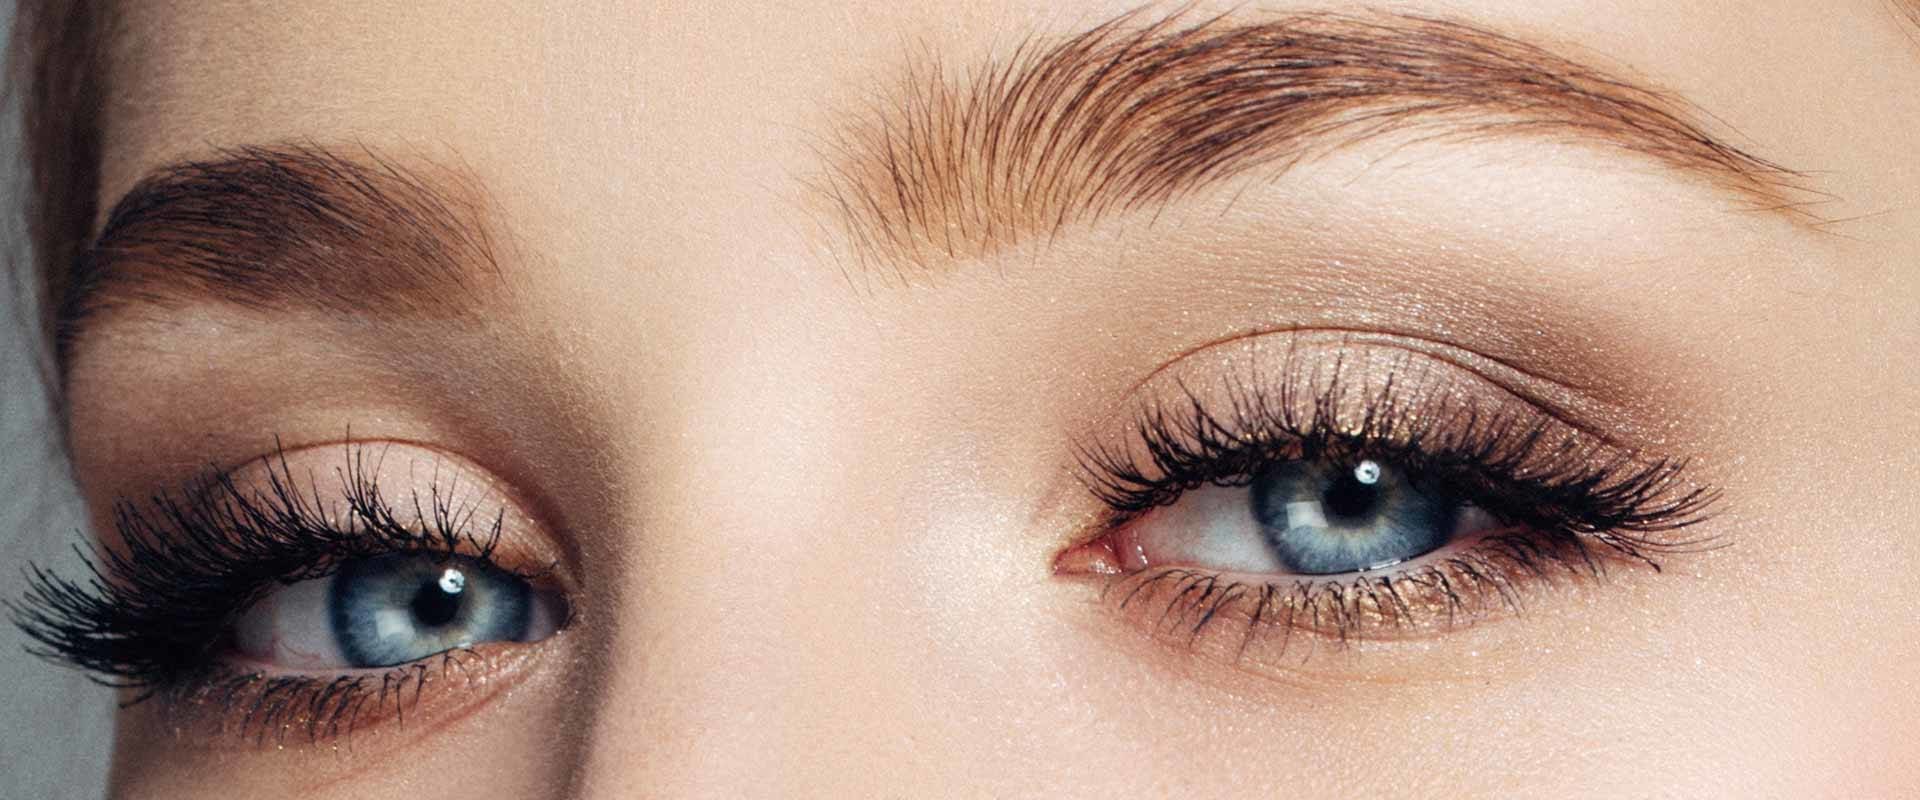 How do wispy lashes look?